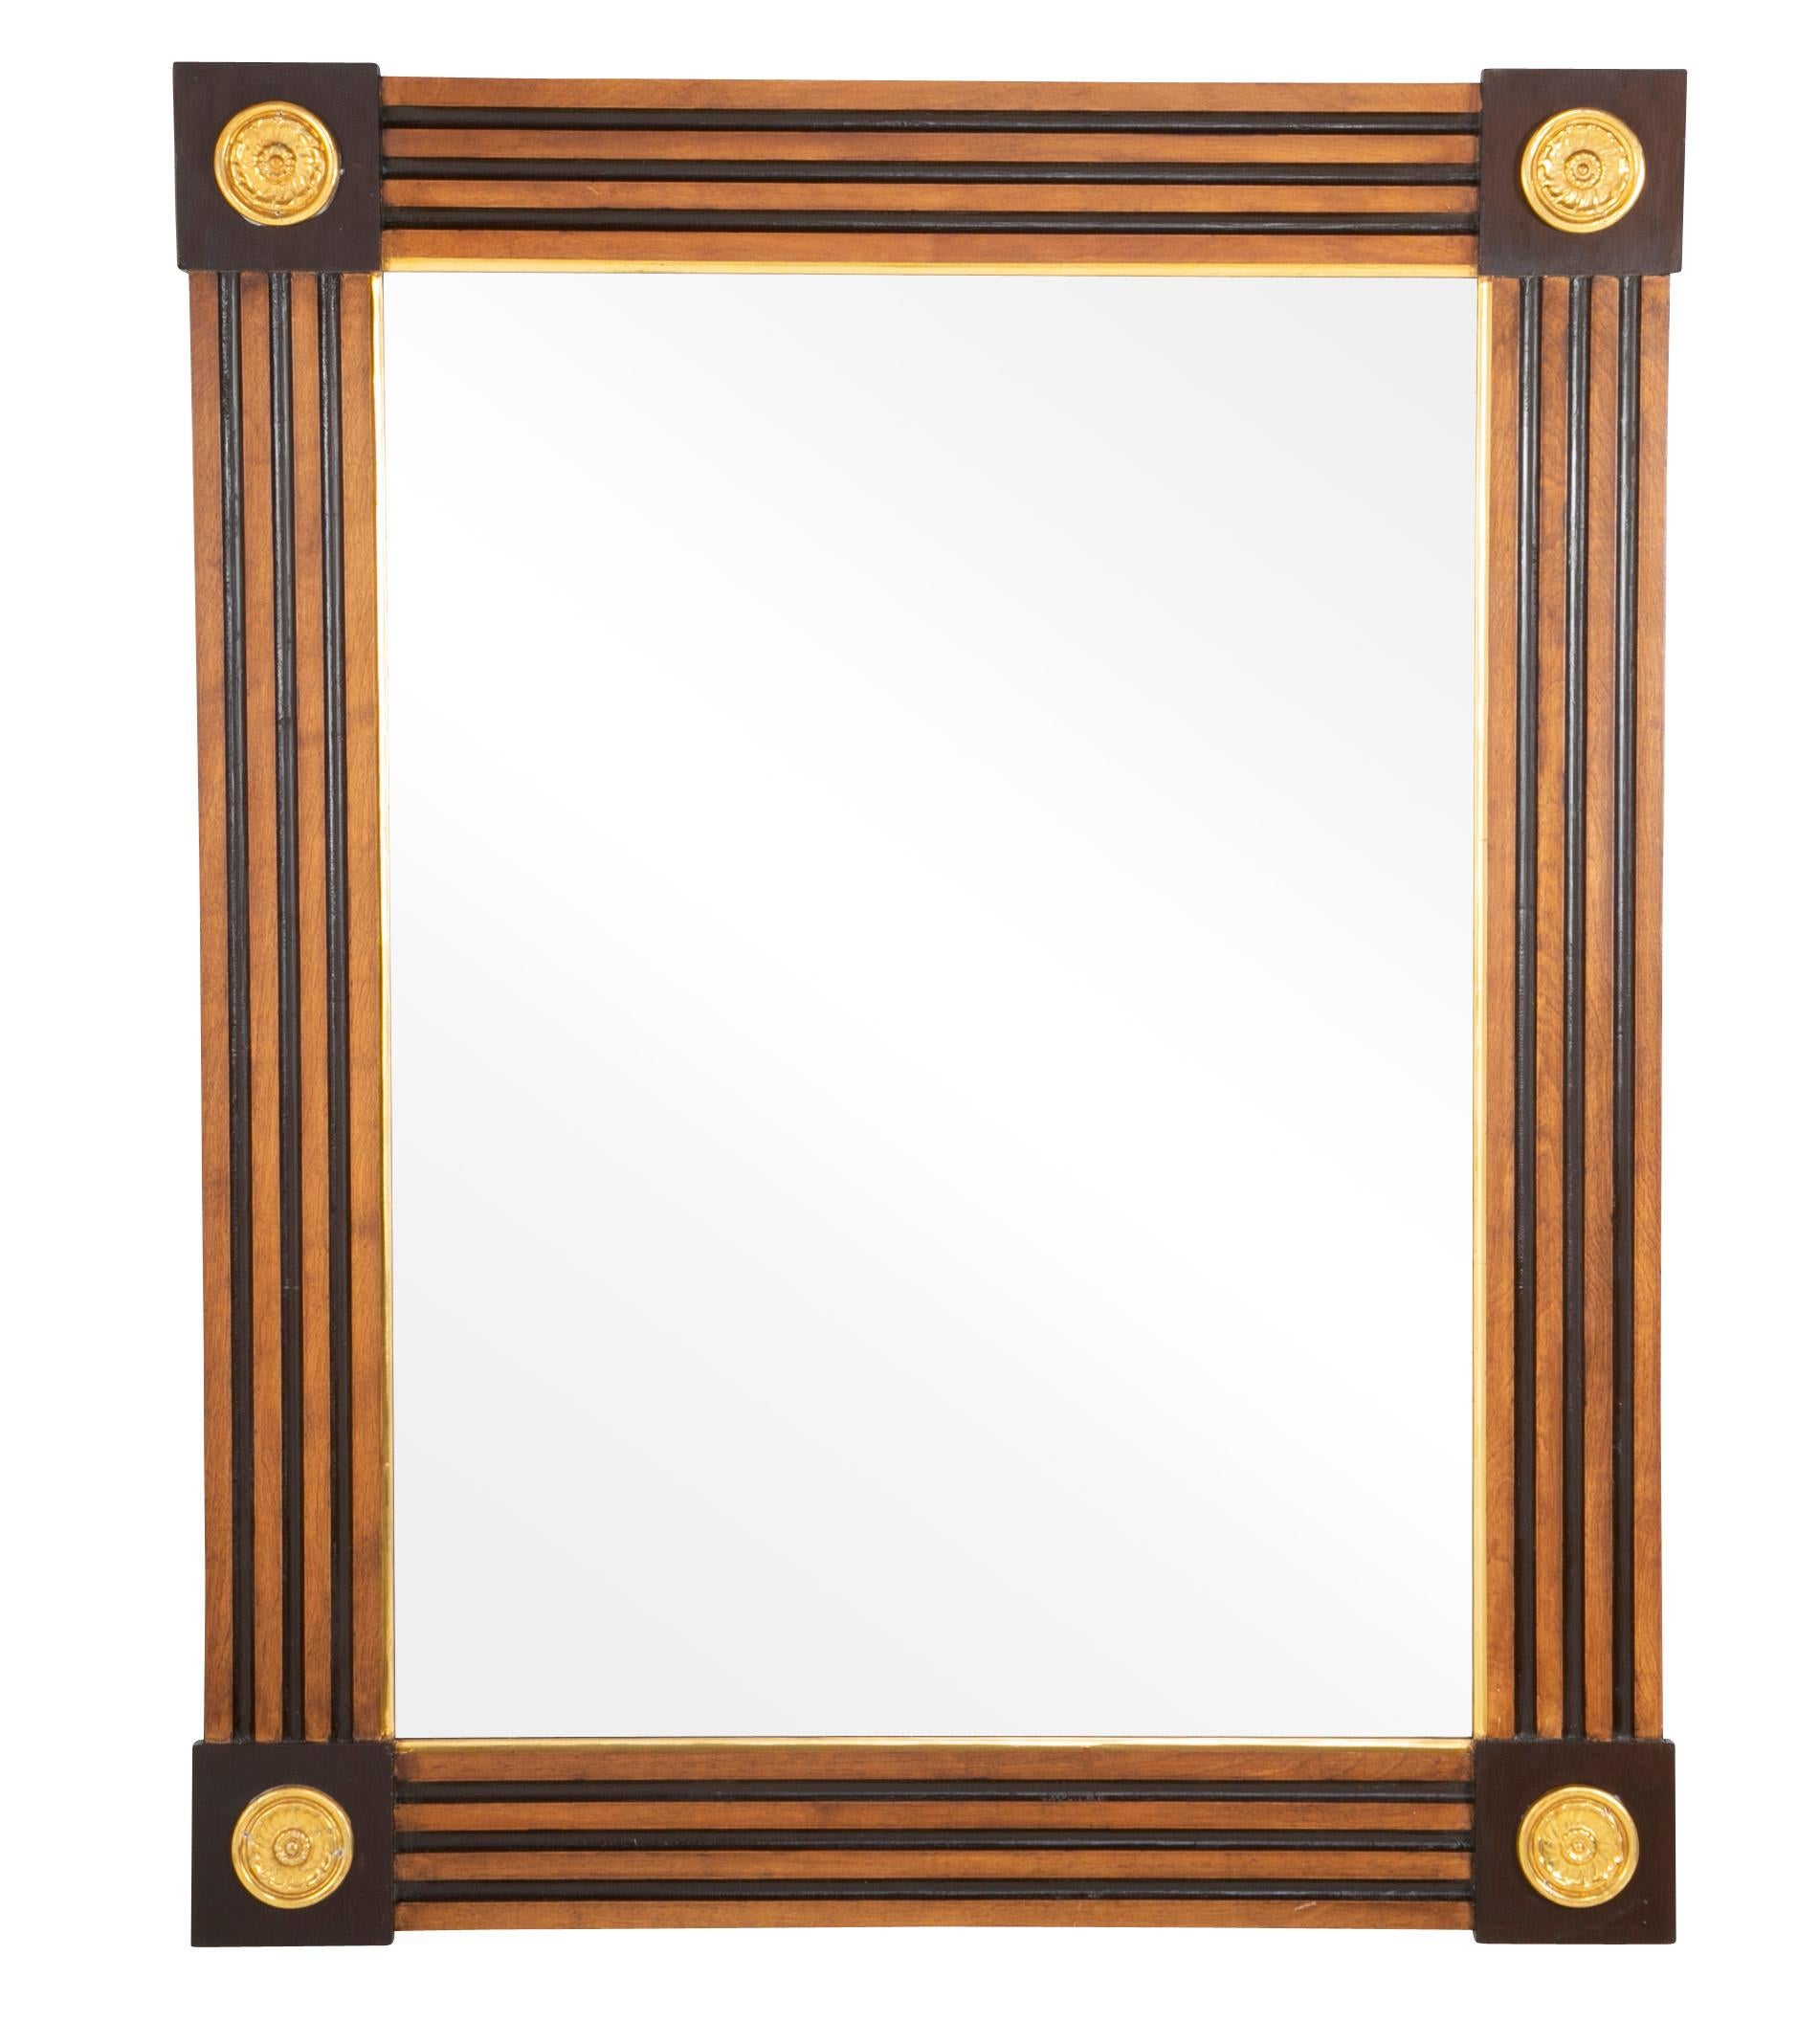 Great looking pair of mirrors in the neoclassical style, the grooved sides meeting at raised square corners with gilt rosettes. Very architectural, midcentury Italian. 

Good scale at 49.75